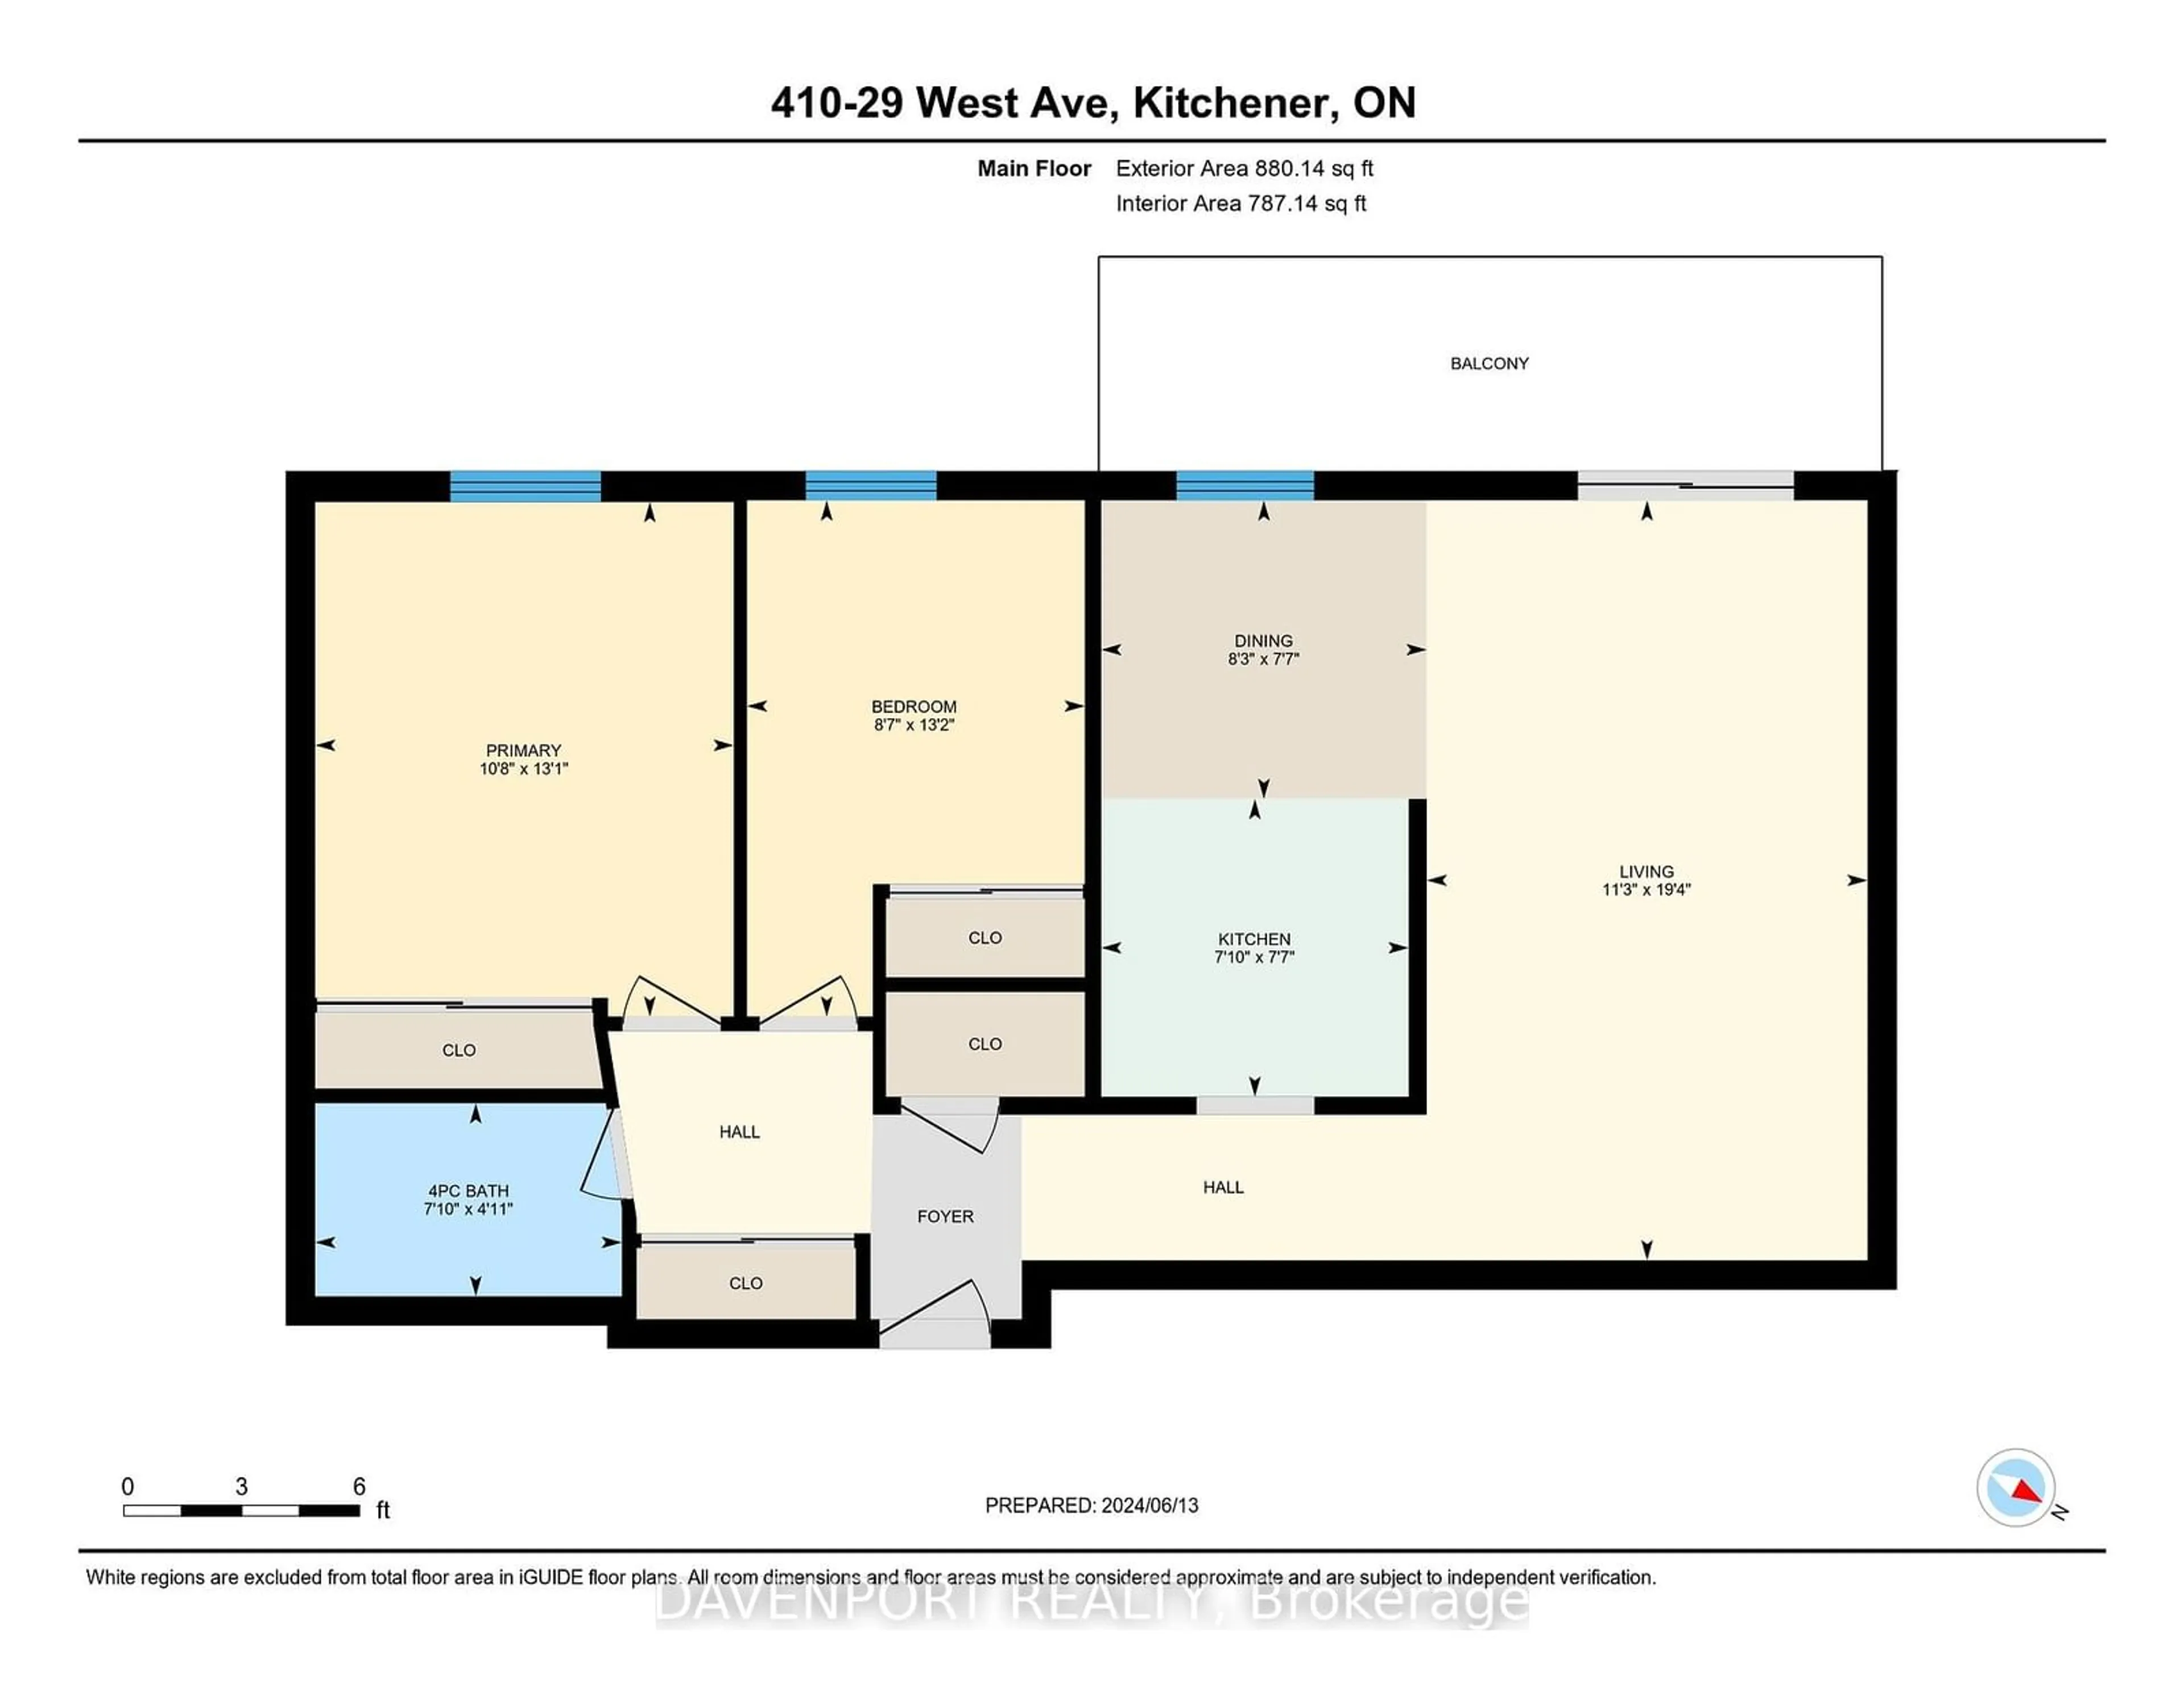 Floor plan for 29 West Ave #410, Kitchener Ontario N2M 5E4